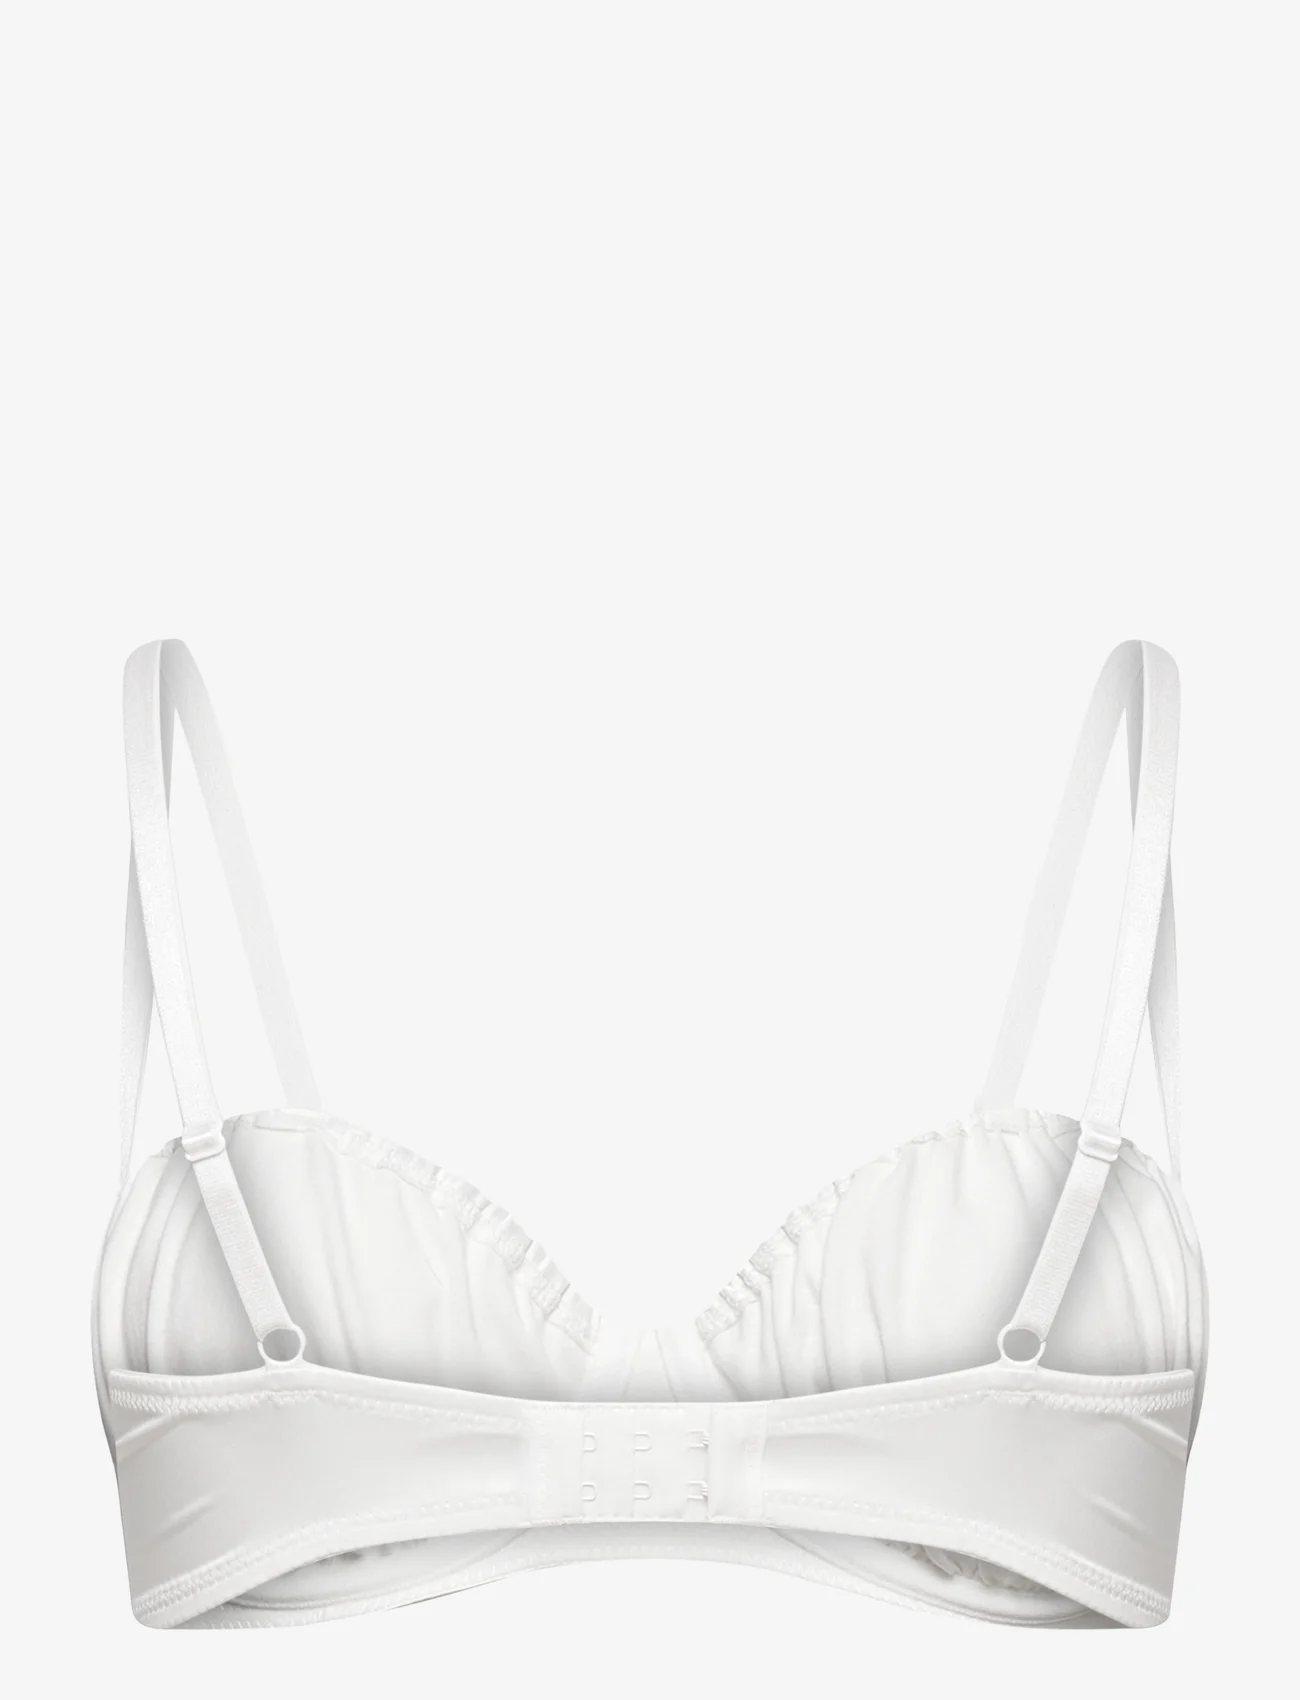 OW Collection - MIRACLE Bra - balconette bras - white - 1